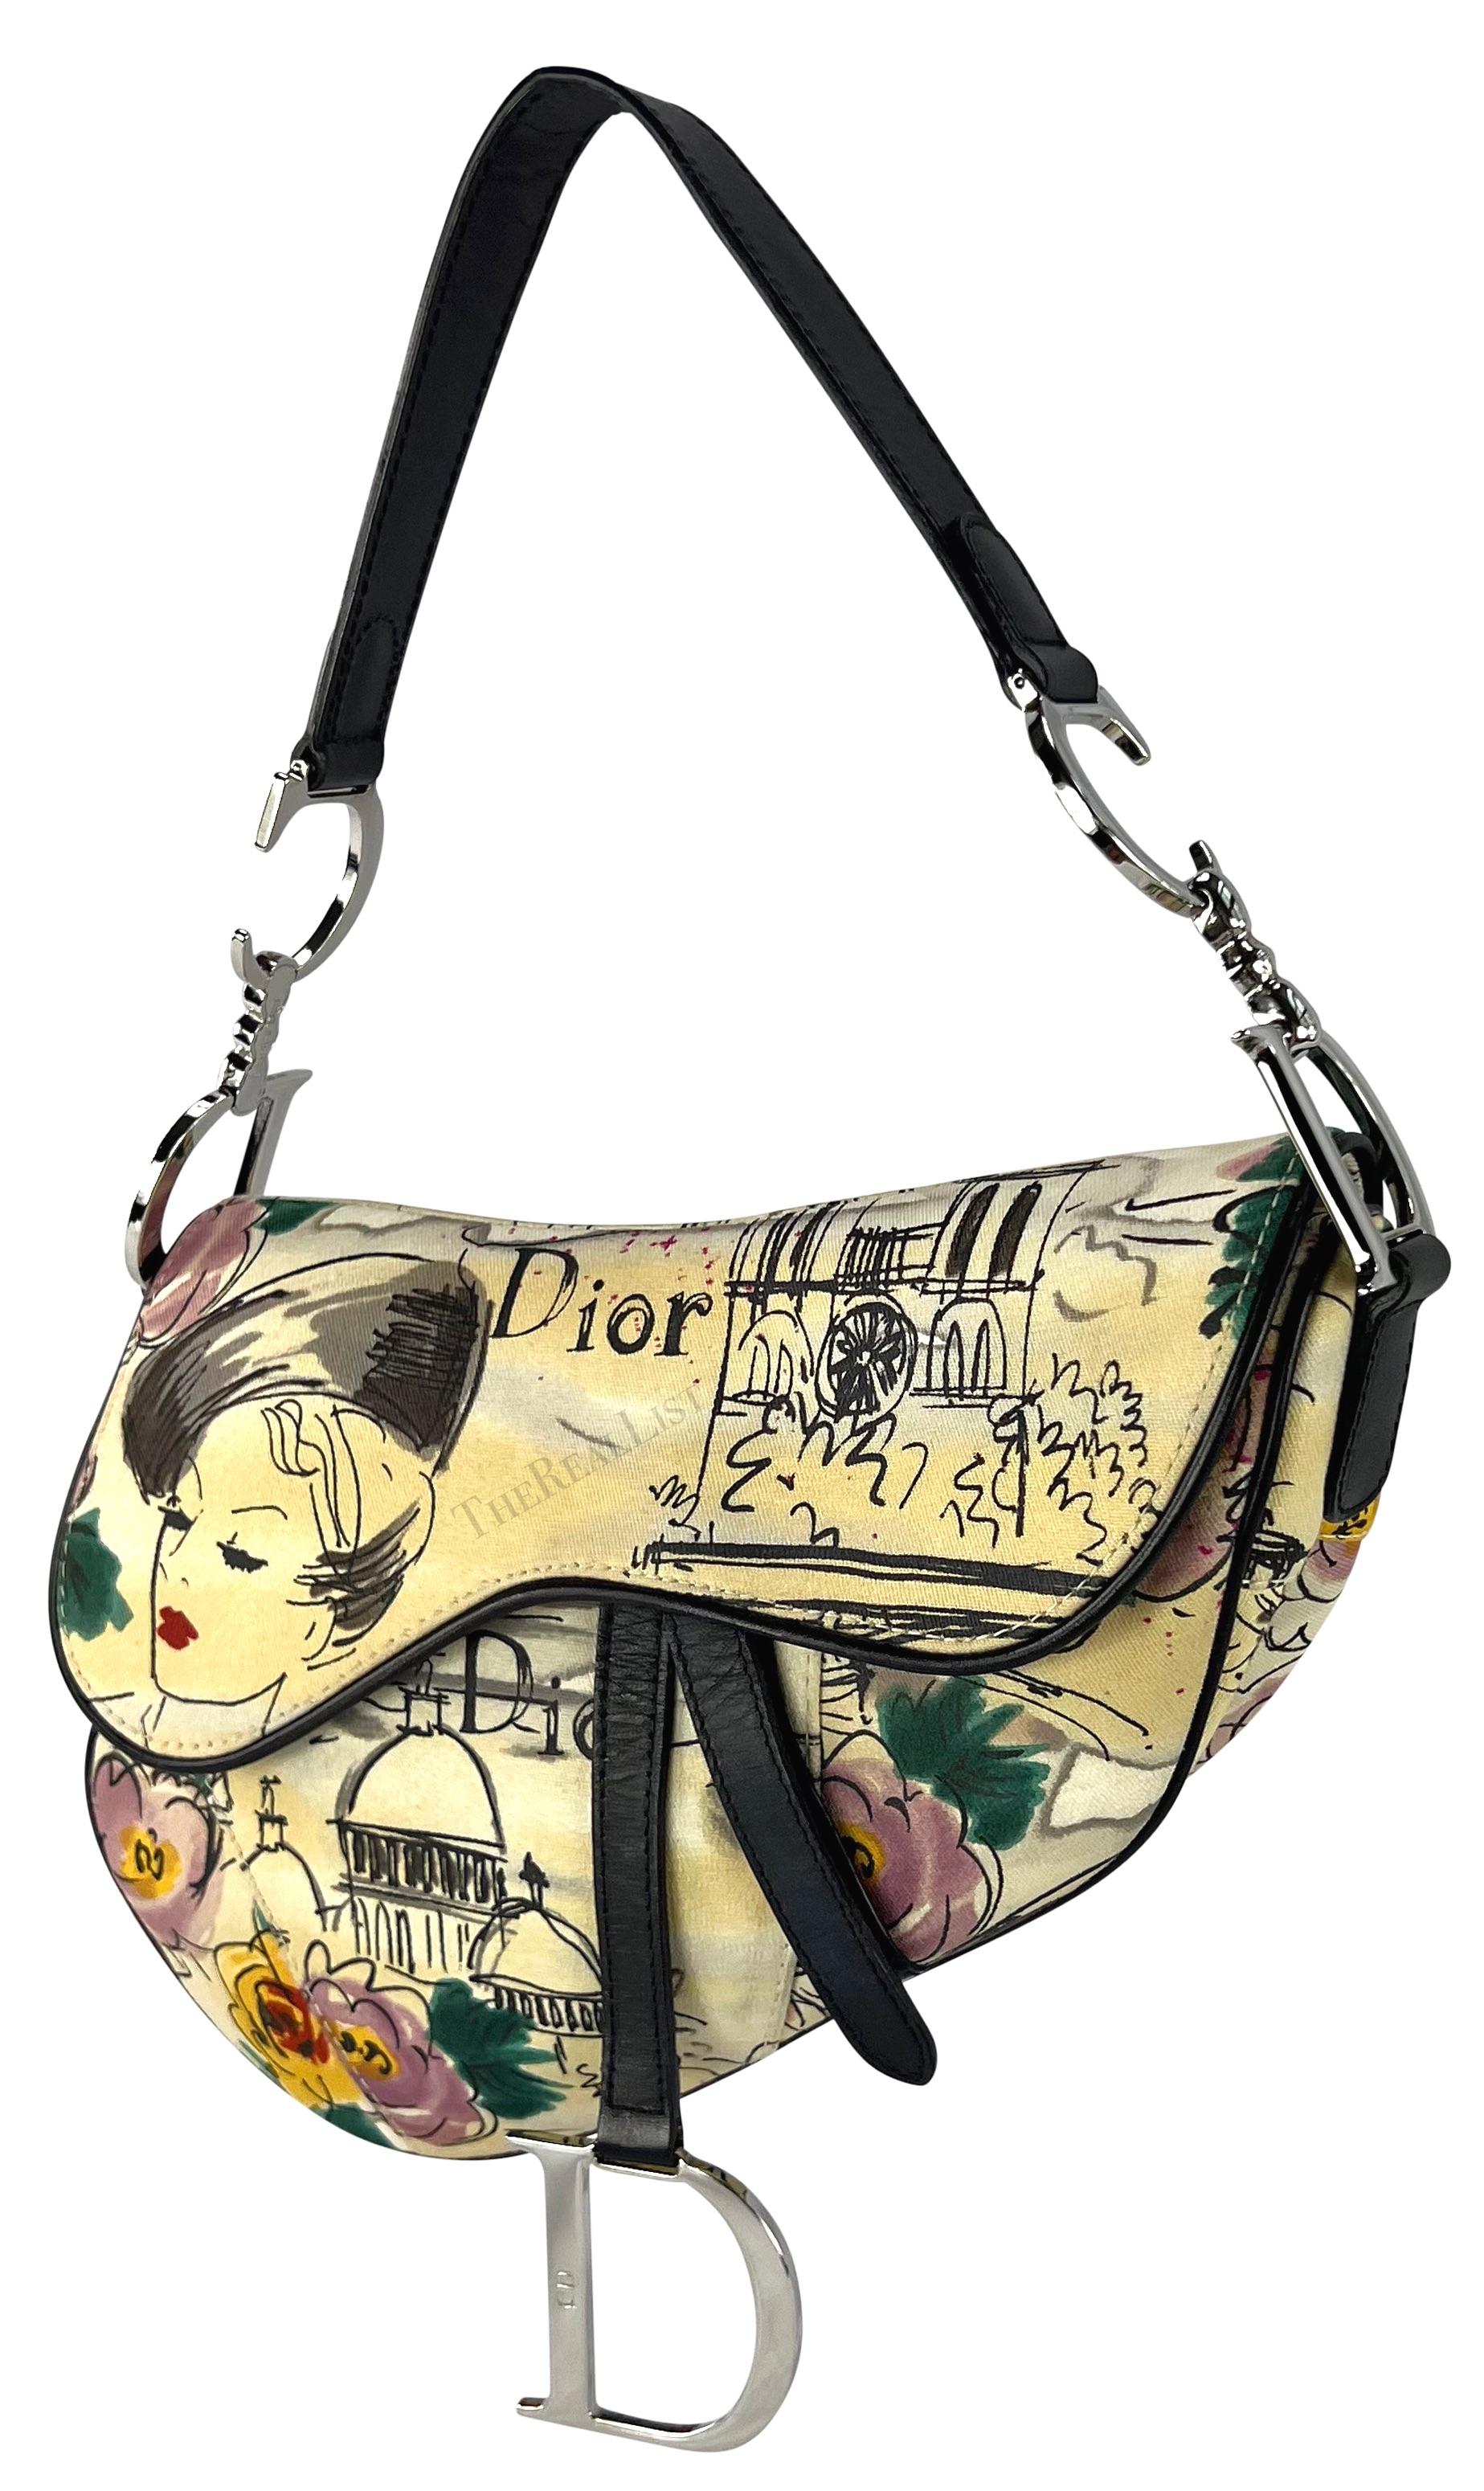 TheRealList presents: a fabulous off-white Parisian-motif Christian Dior saddle bag, designed by John Gallino. From 2005, this limited edition bag pays homage to the brand’s French heritage and is covered in a watercolor floral motif with Parisian